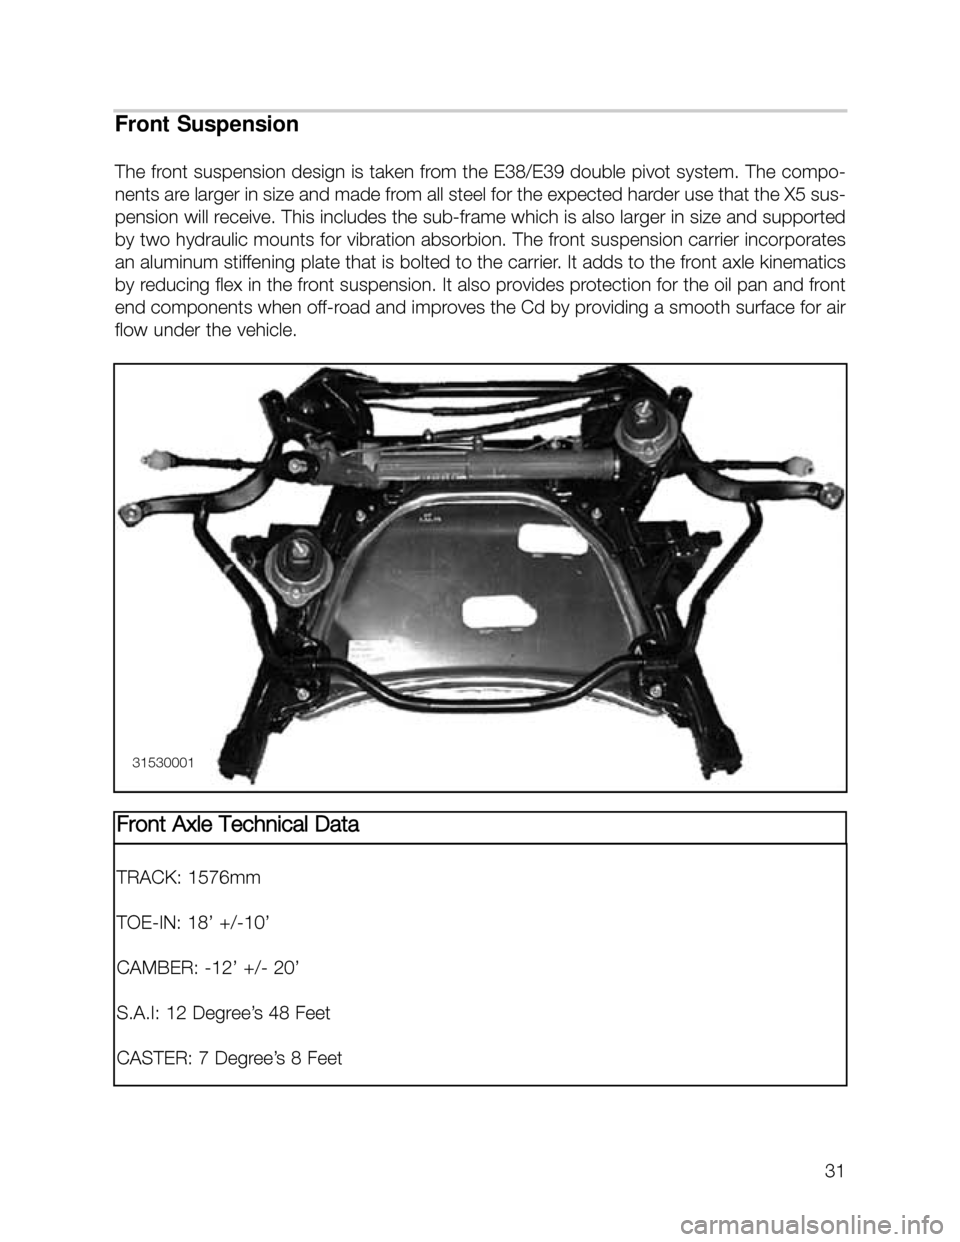 BMW X5 2002 E53 Owners Guide 31
Front Suspension
The front suspension design is taken from the E38/E39 double pivot system. The compo-
nents are larger in size and made from all steel for the expected harder use that the X5 sus-
